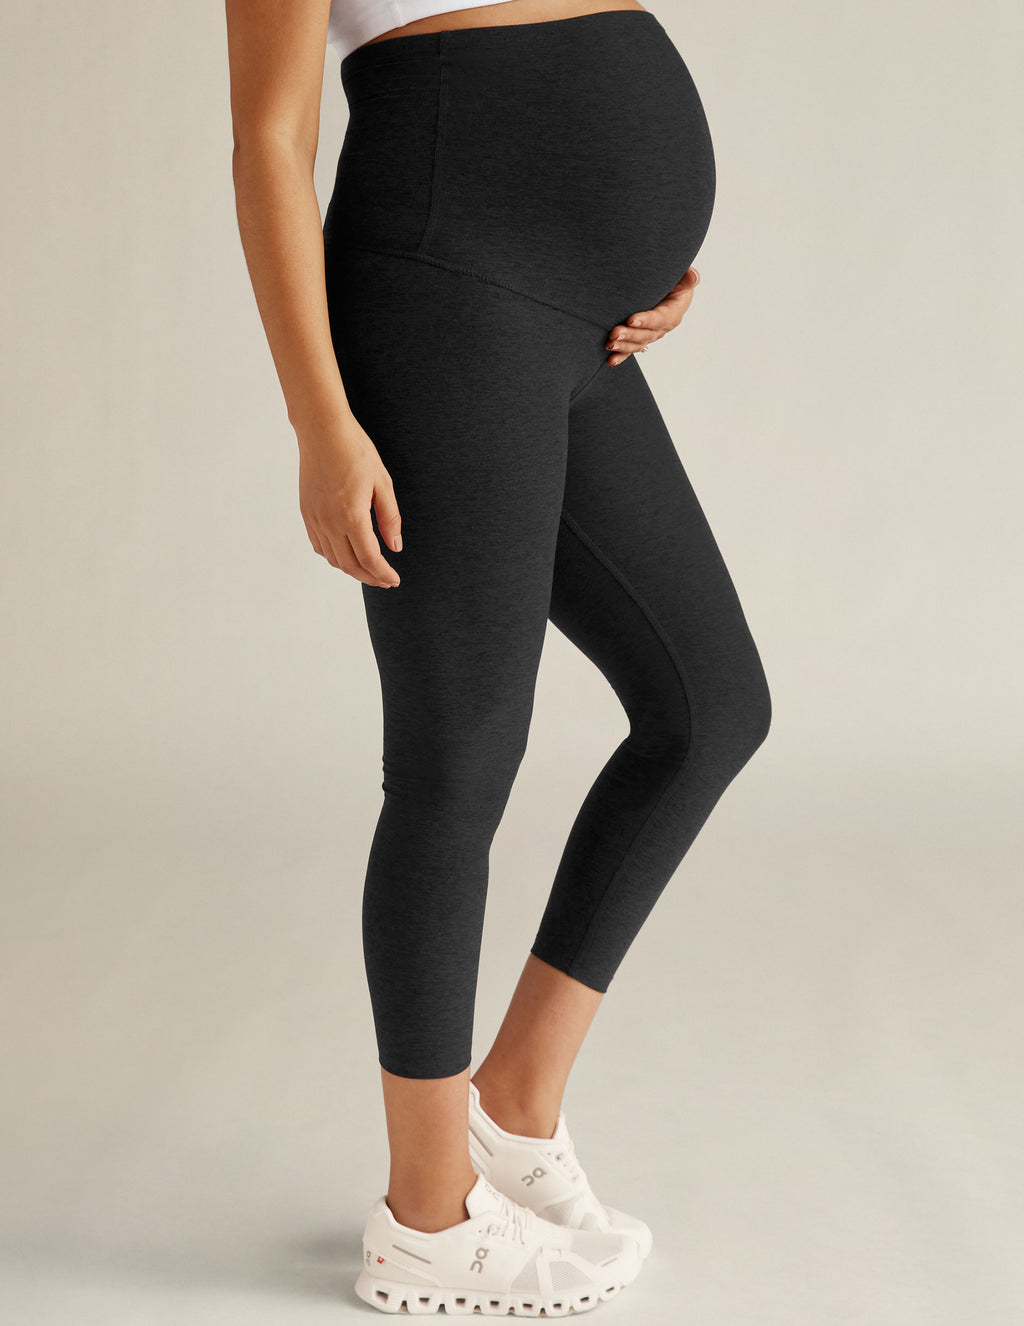 vastwit Maternity Leggings Over The Belly Yoga Pants Women Pregnancy  Stretch Skinny Sports Outfit Black B X-Large at  Women's Clothing  store